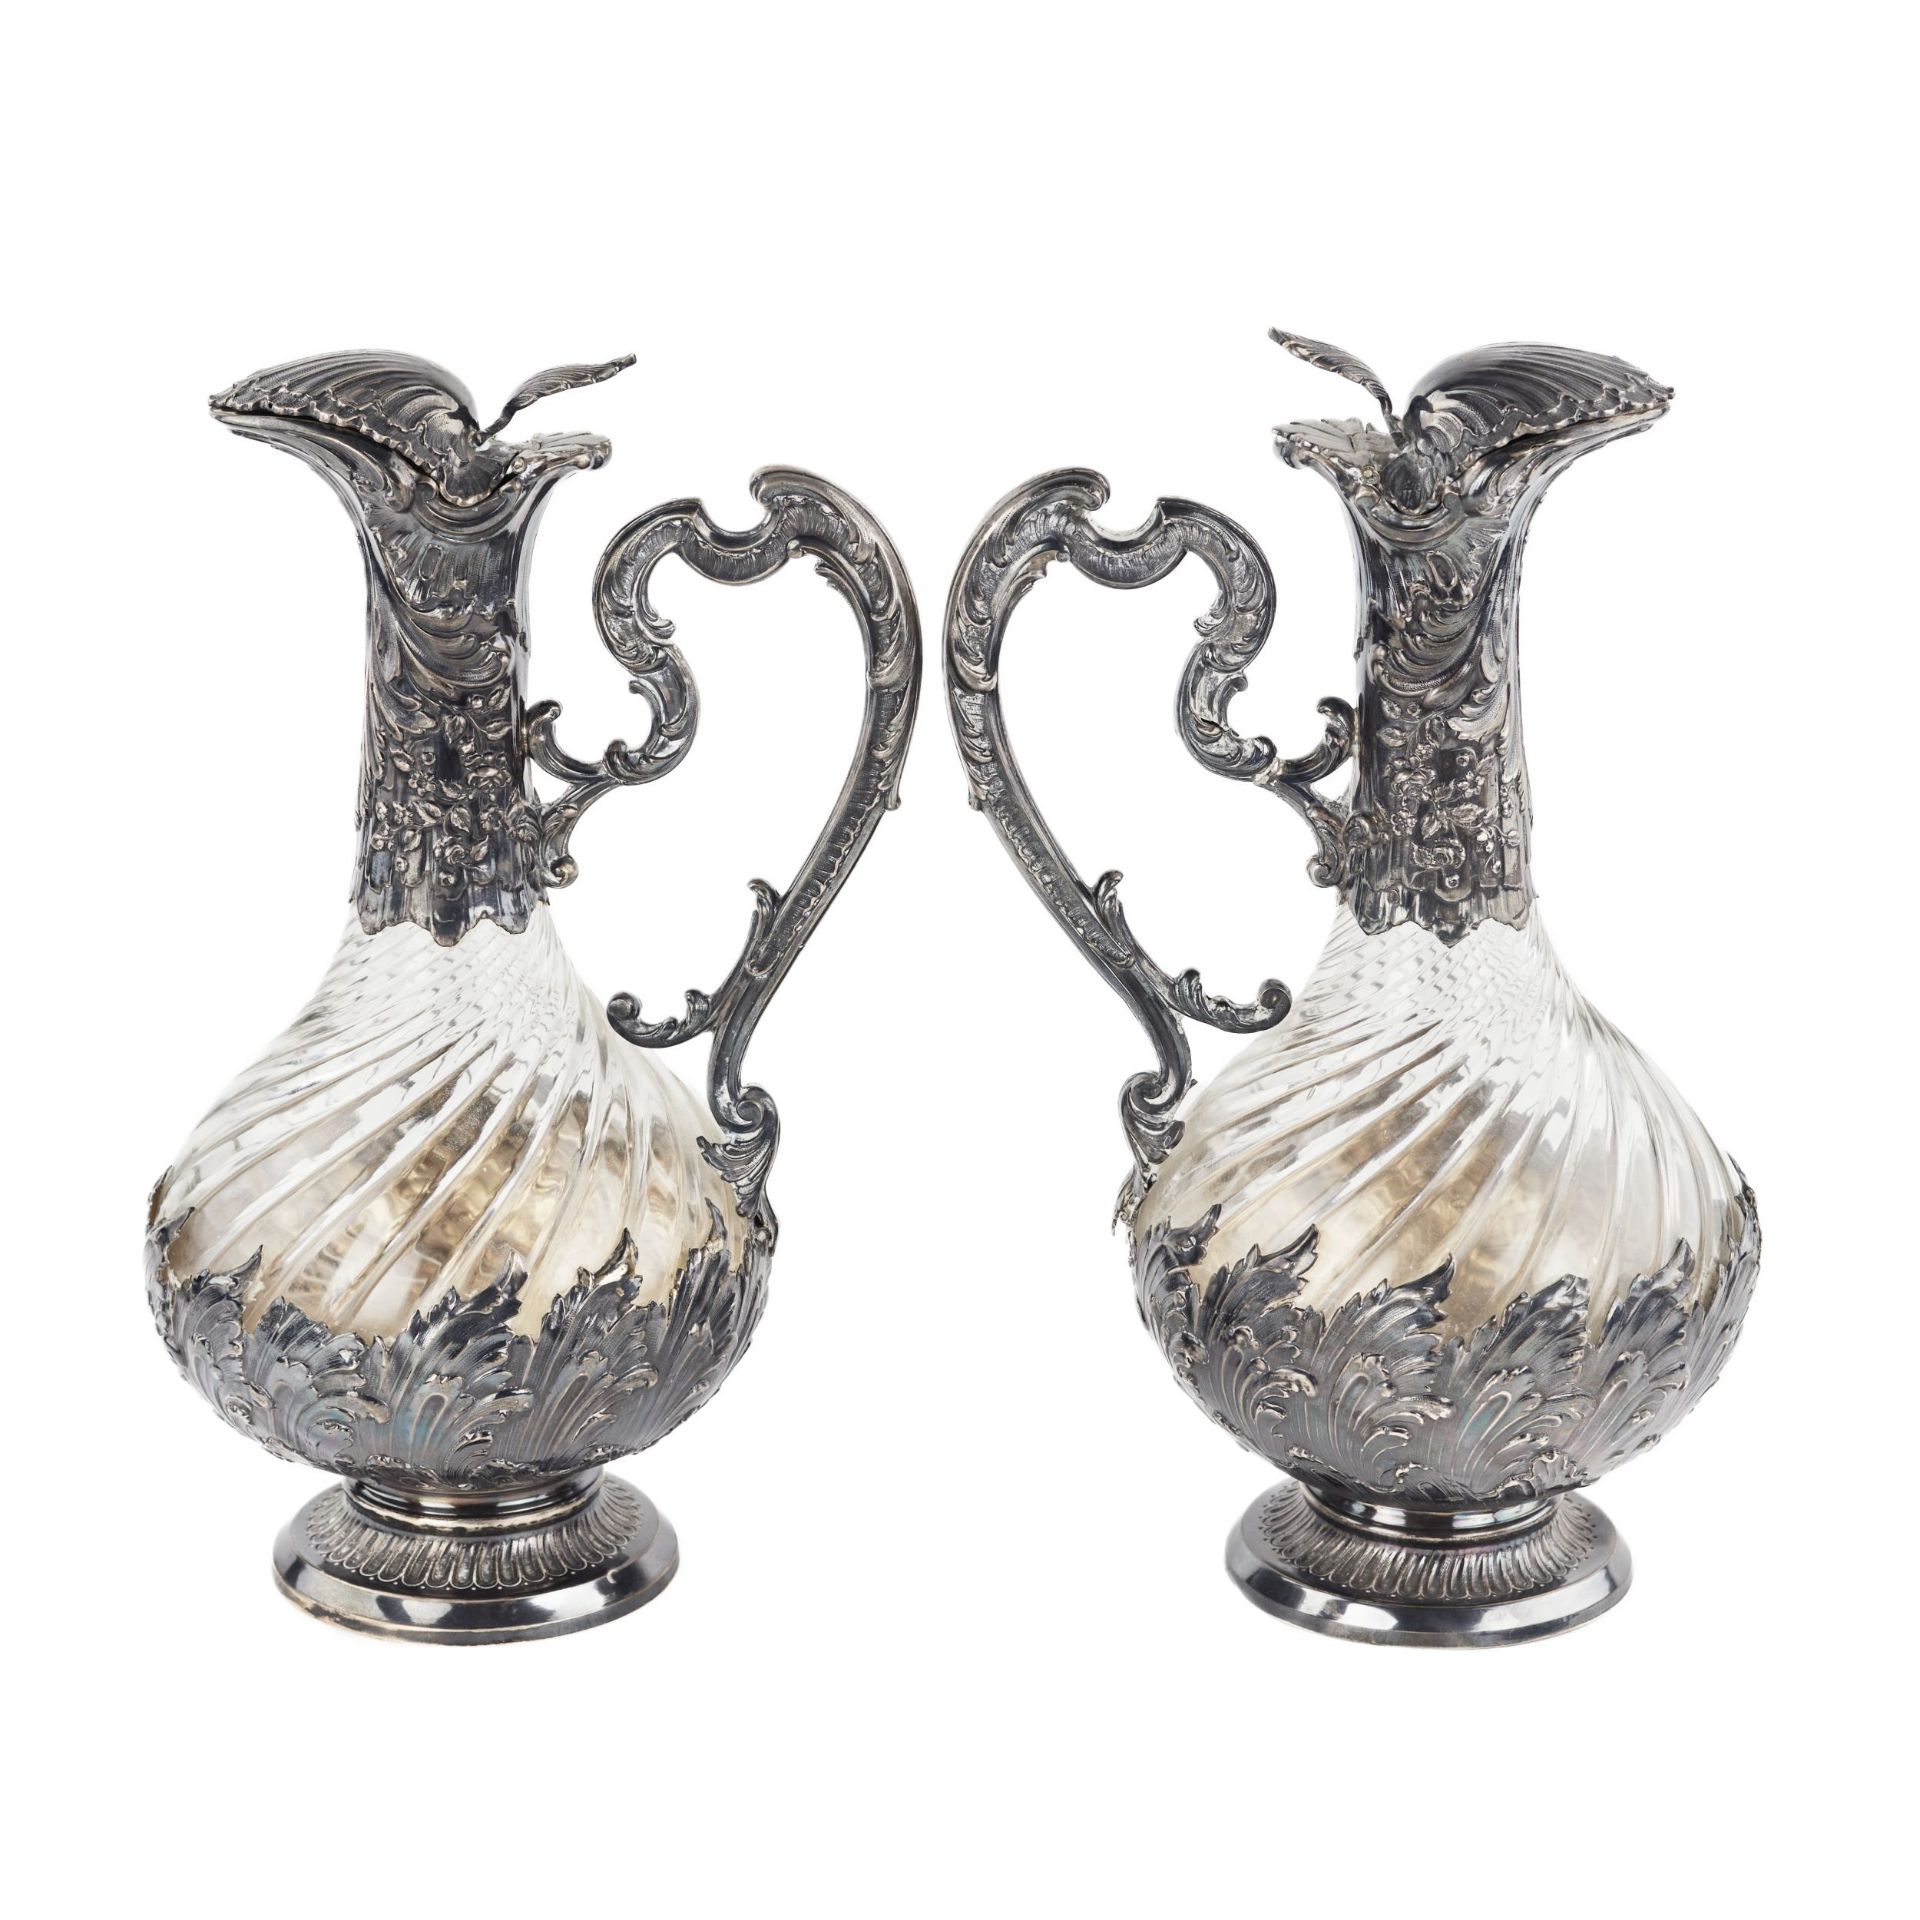 Frangiere & Laroche. Pair of French glass wine jugs in silver from the 1880s. - Bild 4 aus 9